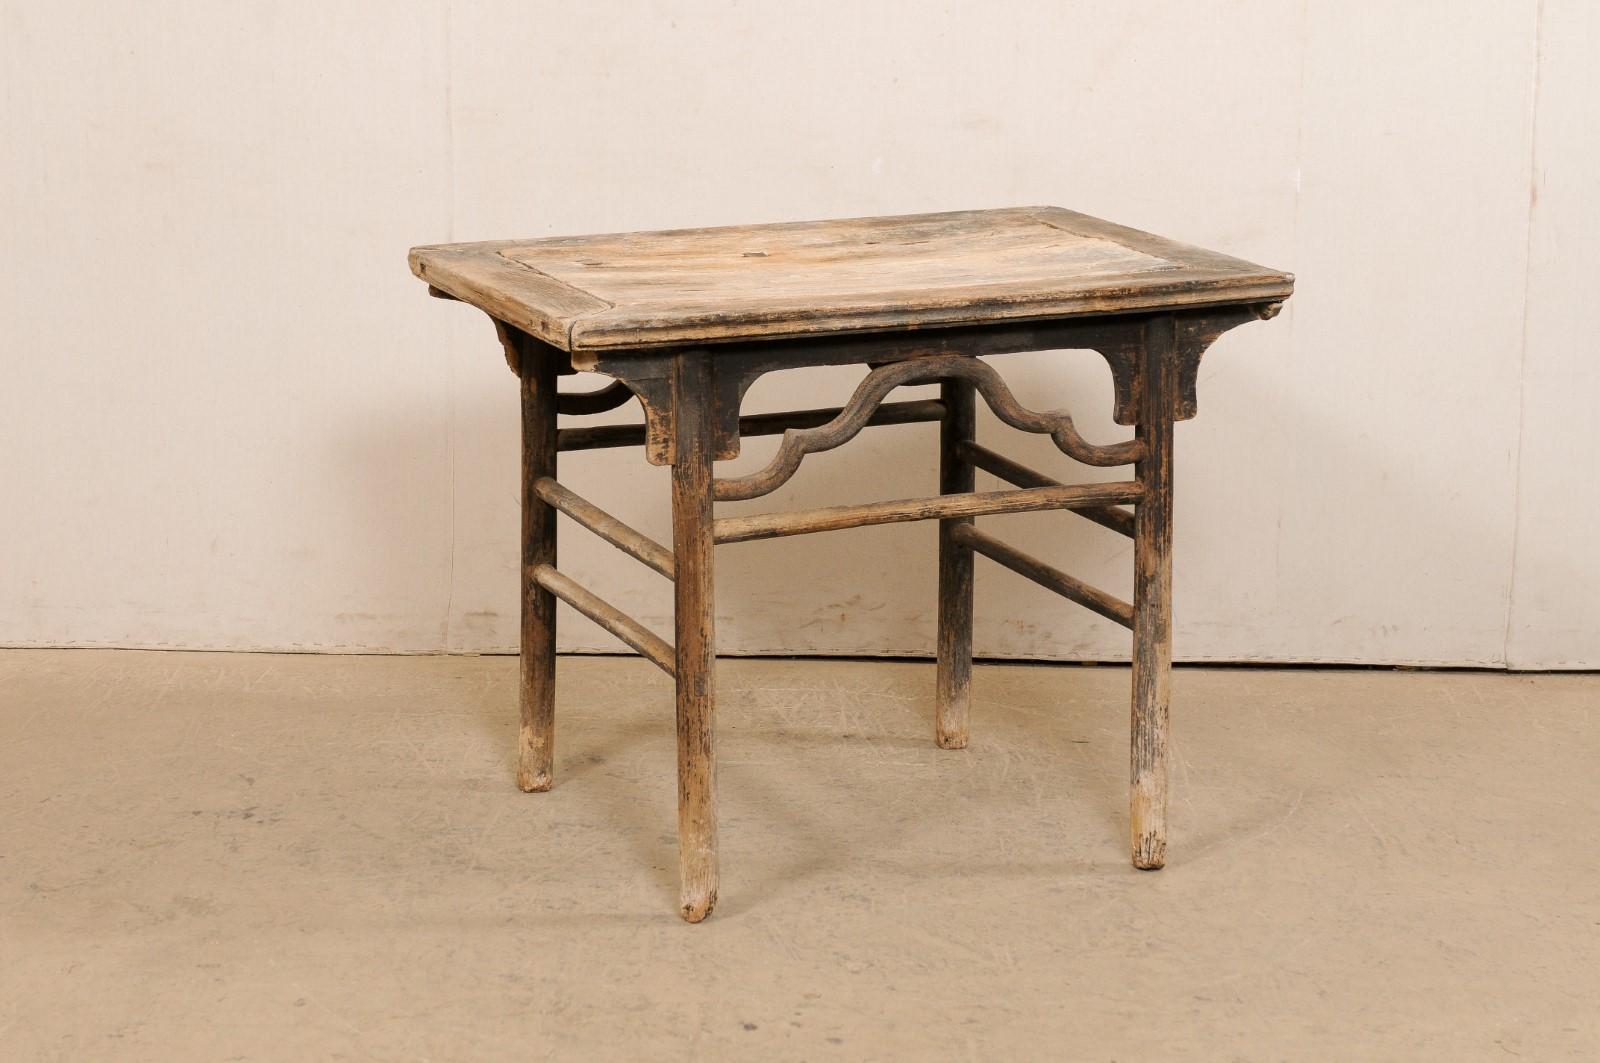 A Chinese wooden occasional table from the 19th century. This beautifully-rustic antique table from China features a framed-board and rectangular-shaped top with fabulous old joinery repairs, with carved-brackets supporting it's underside and curvy